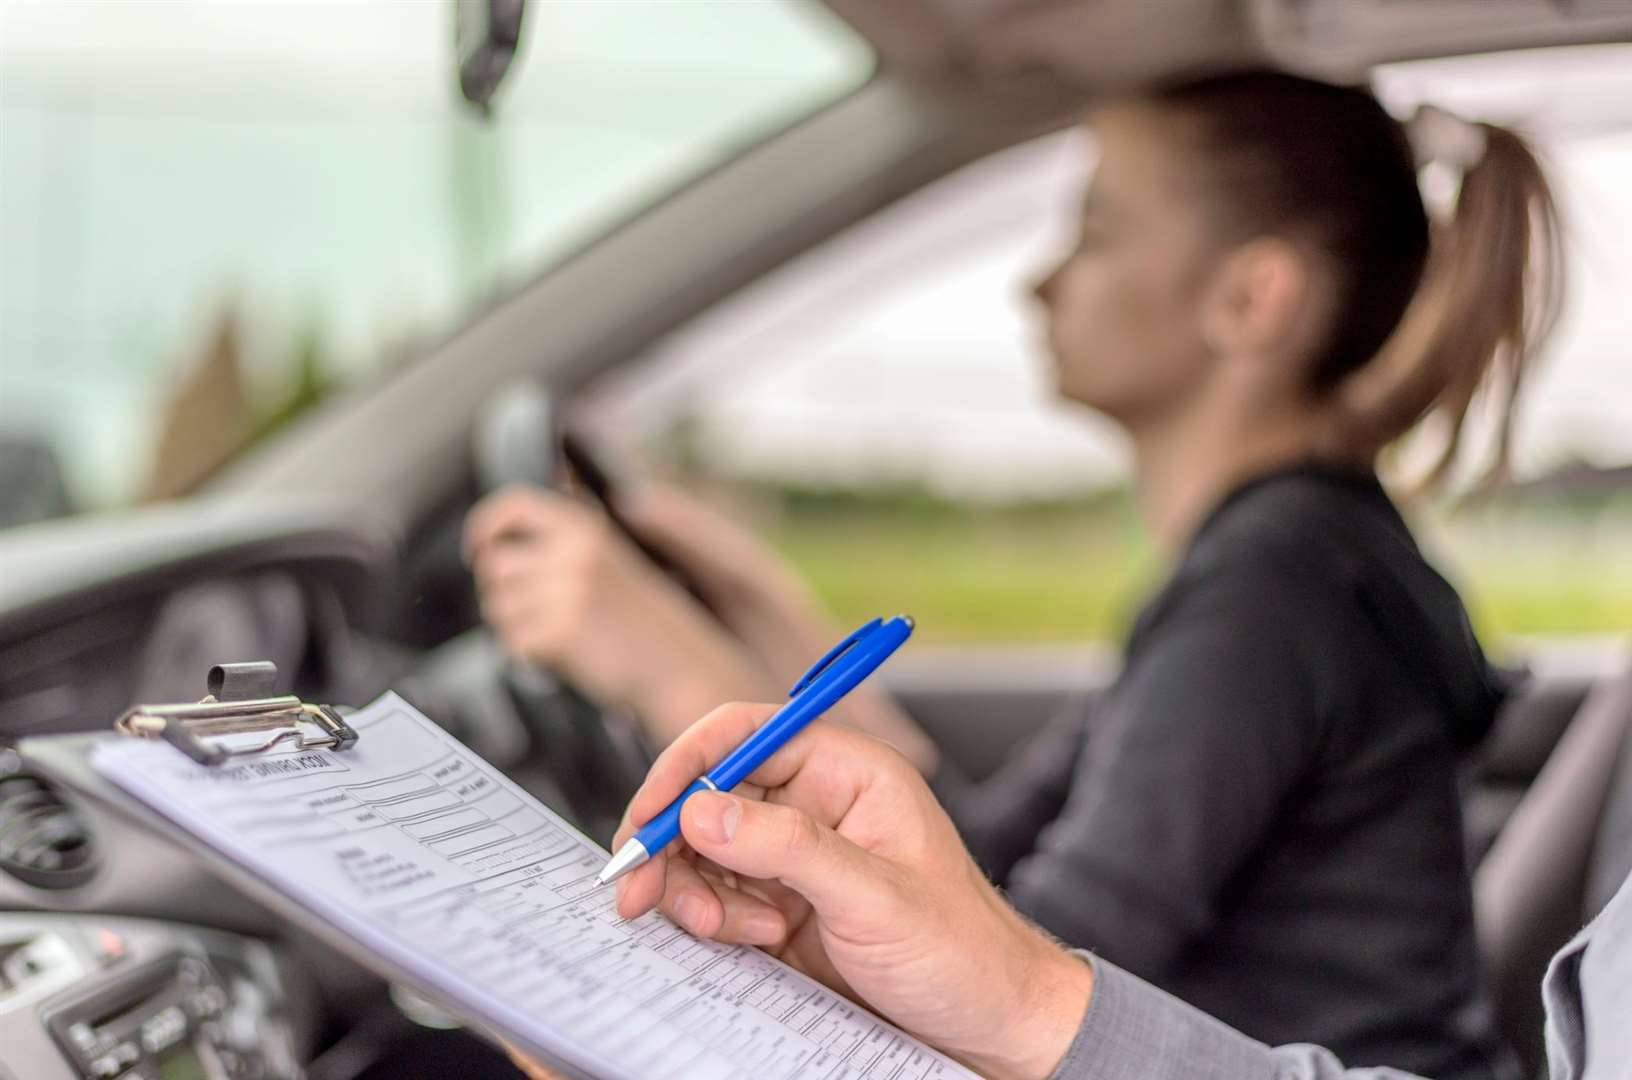 Learner drivers need more help with the cost of insurance, says the AA. Image: iStock.